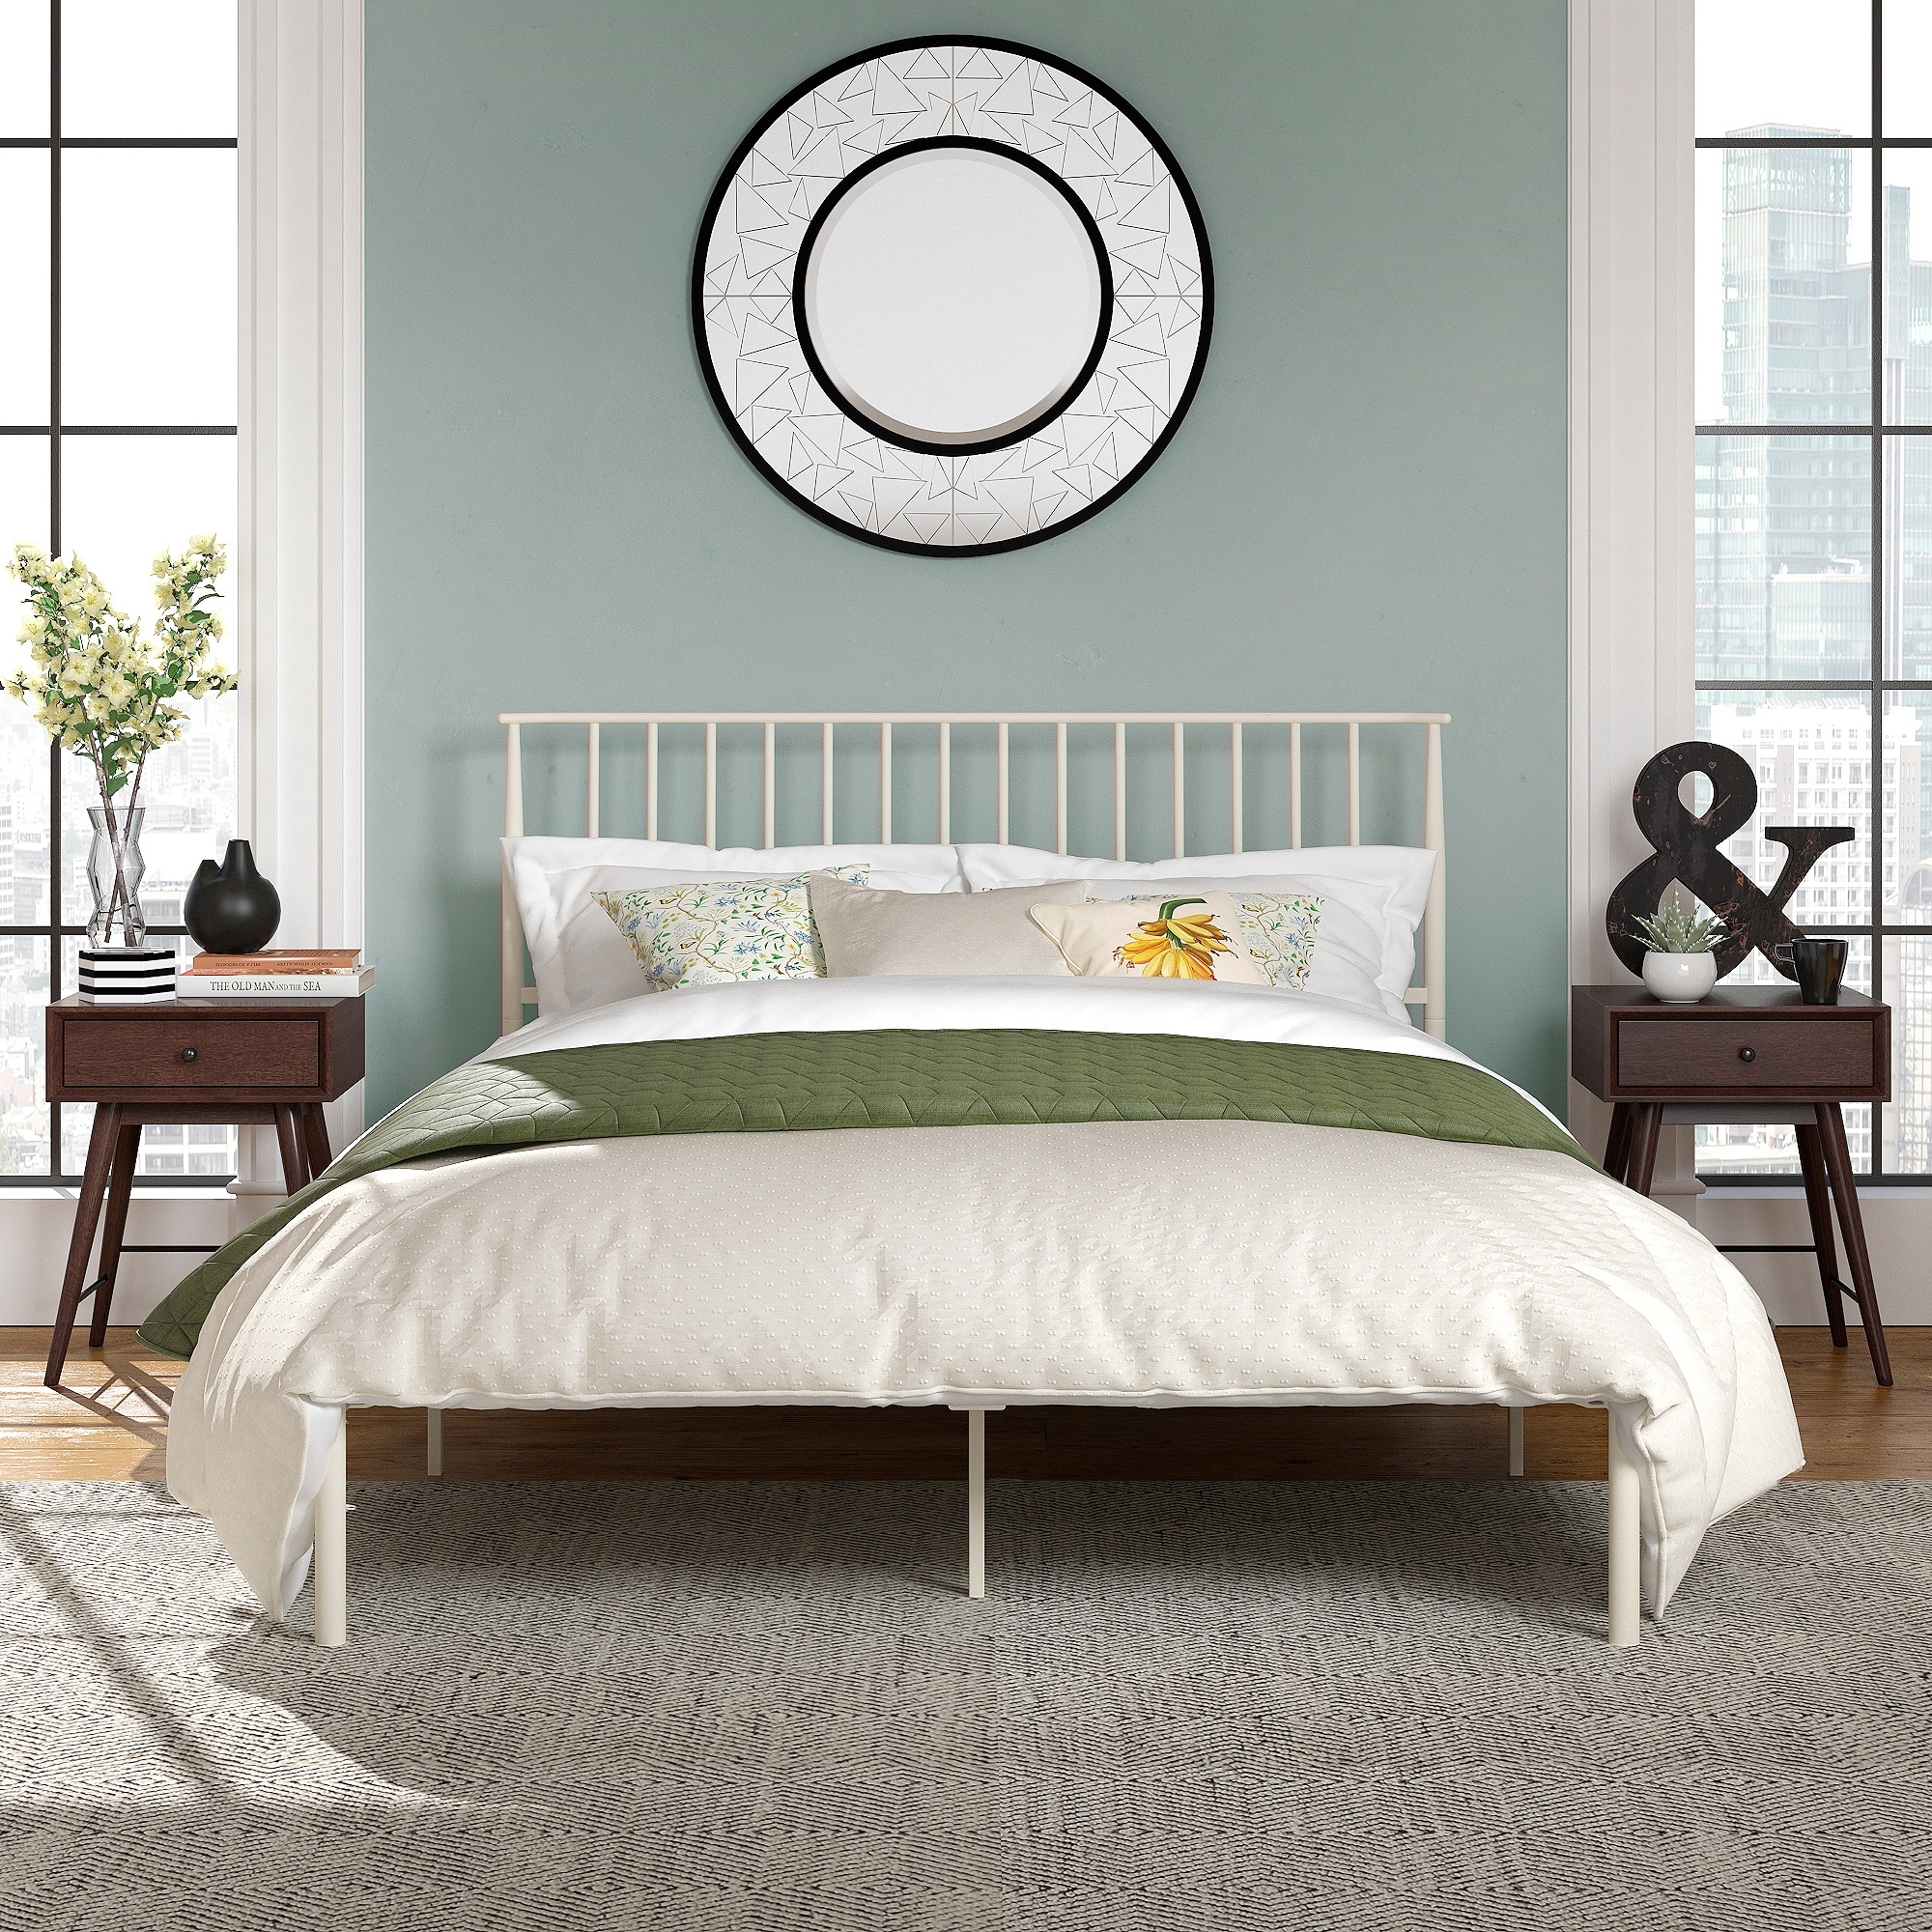 Bliss Metal Platform Bed with Curved Metal Headboard by iQ